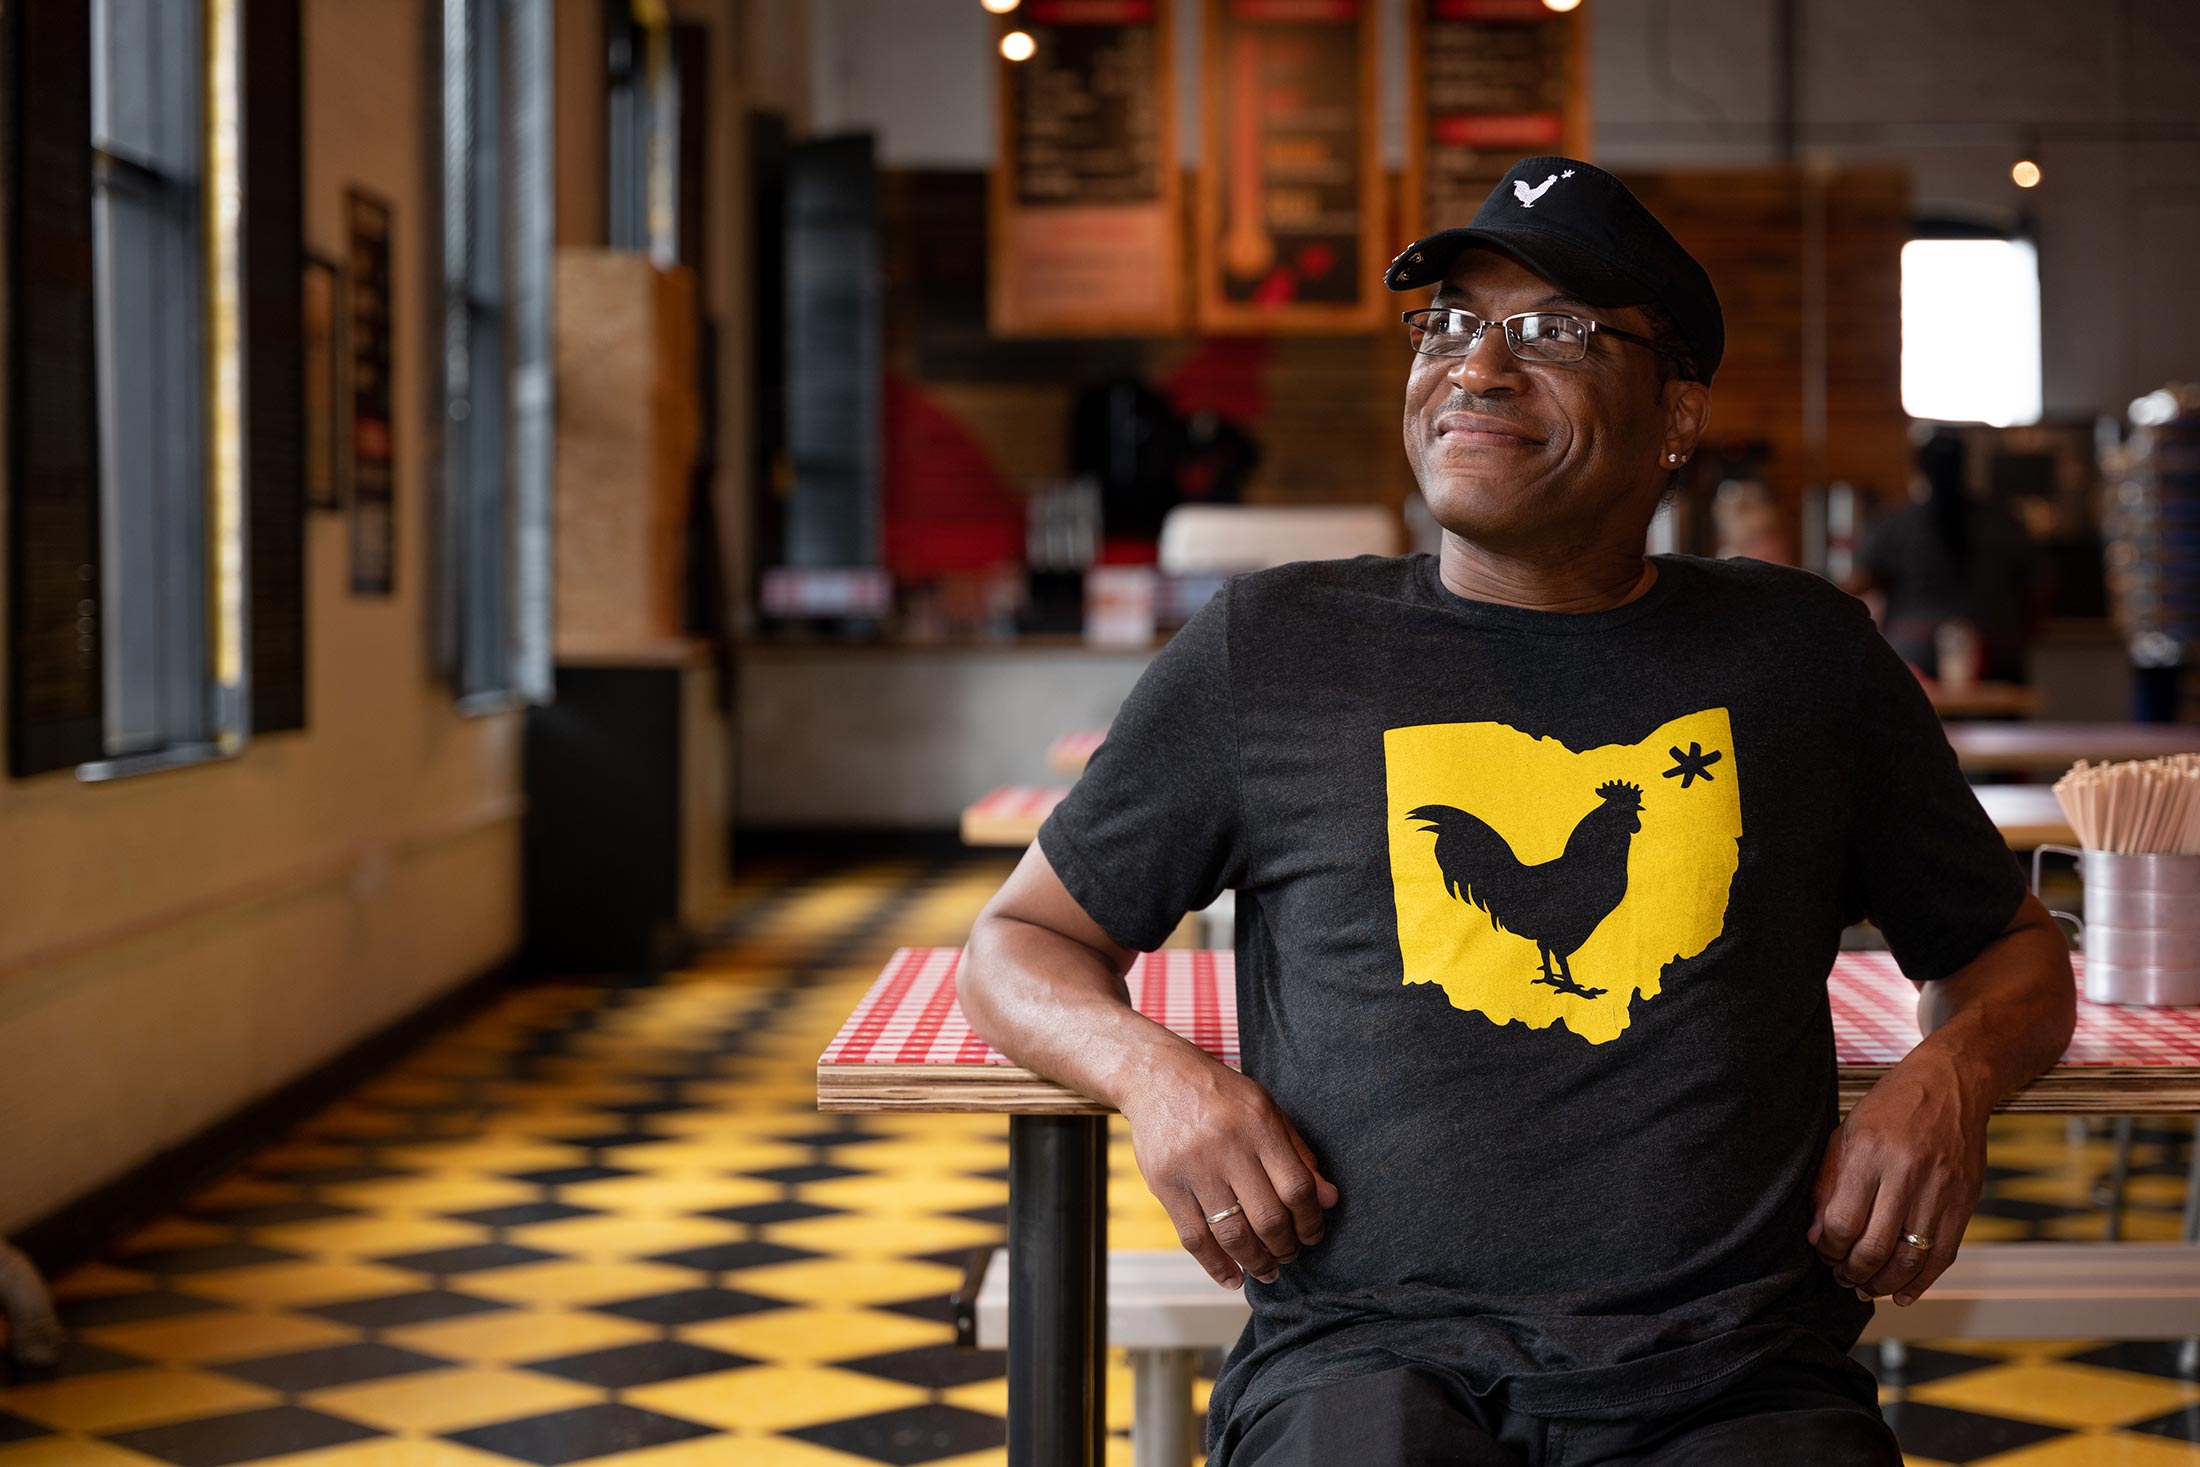 Hot Chicken Takeover Tackles Criminal Justice Reform With Jobs